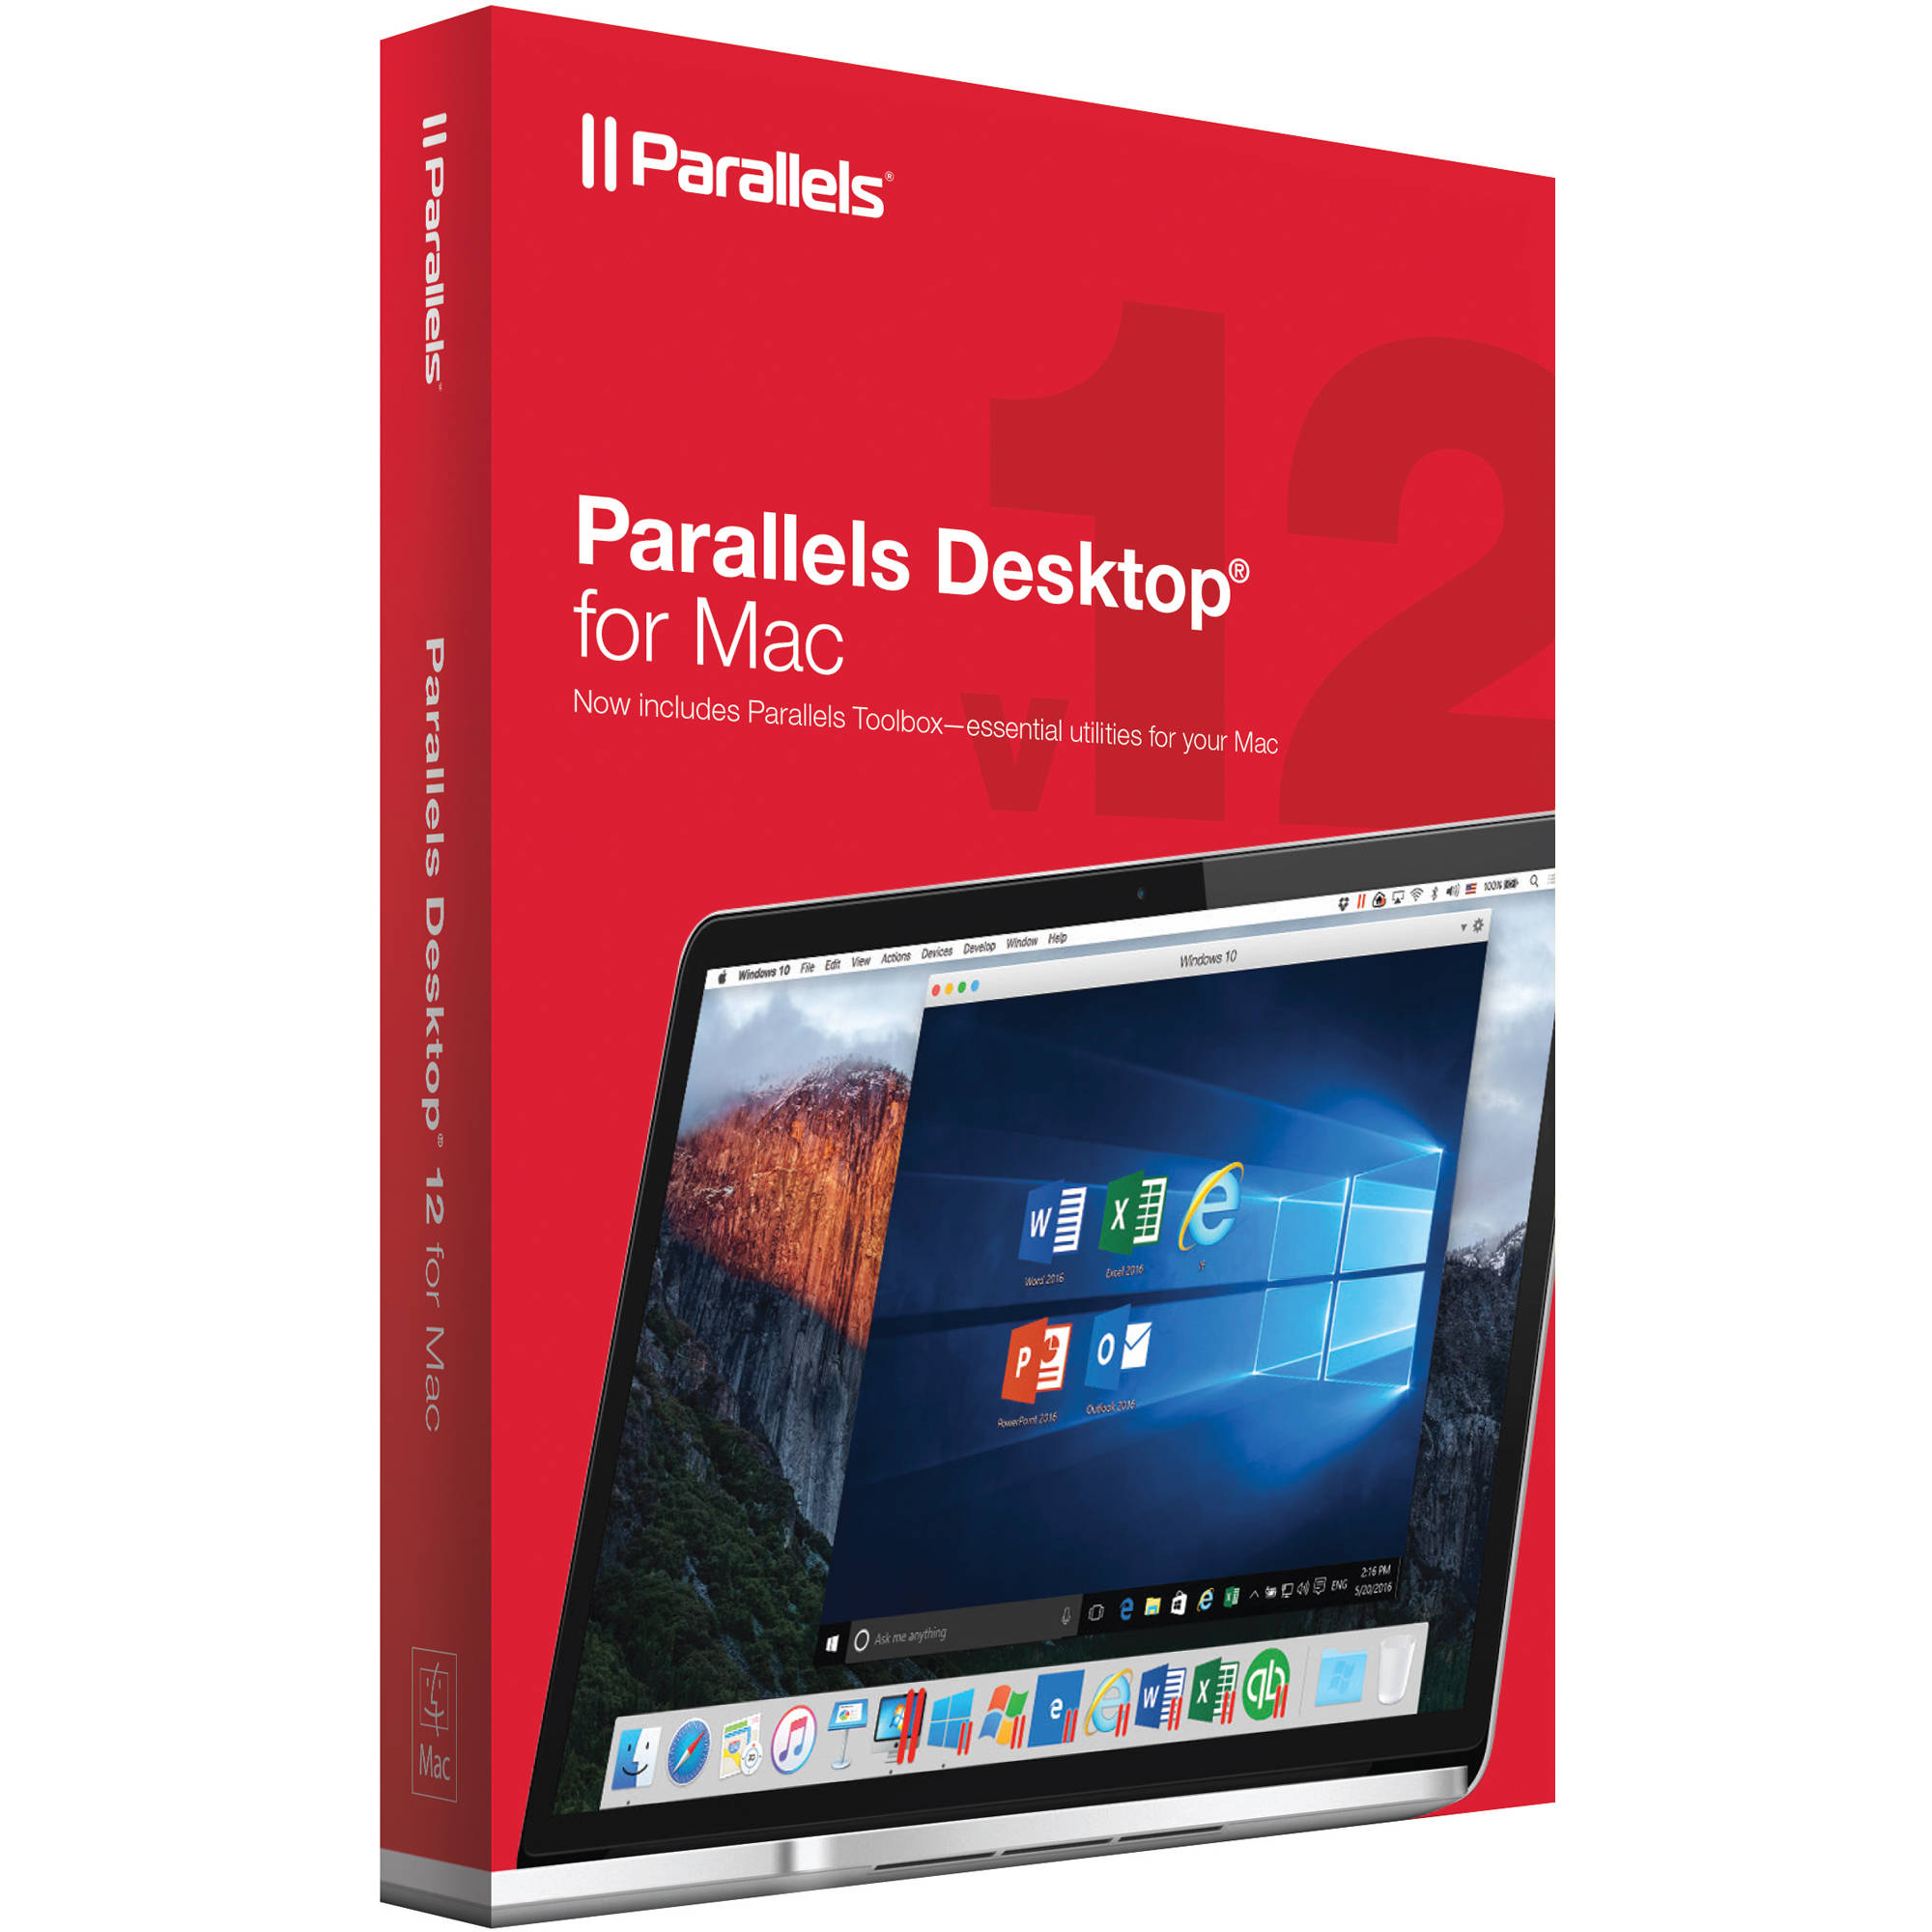 Where To Buy Parallels Desktop For Mac